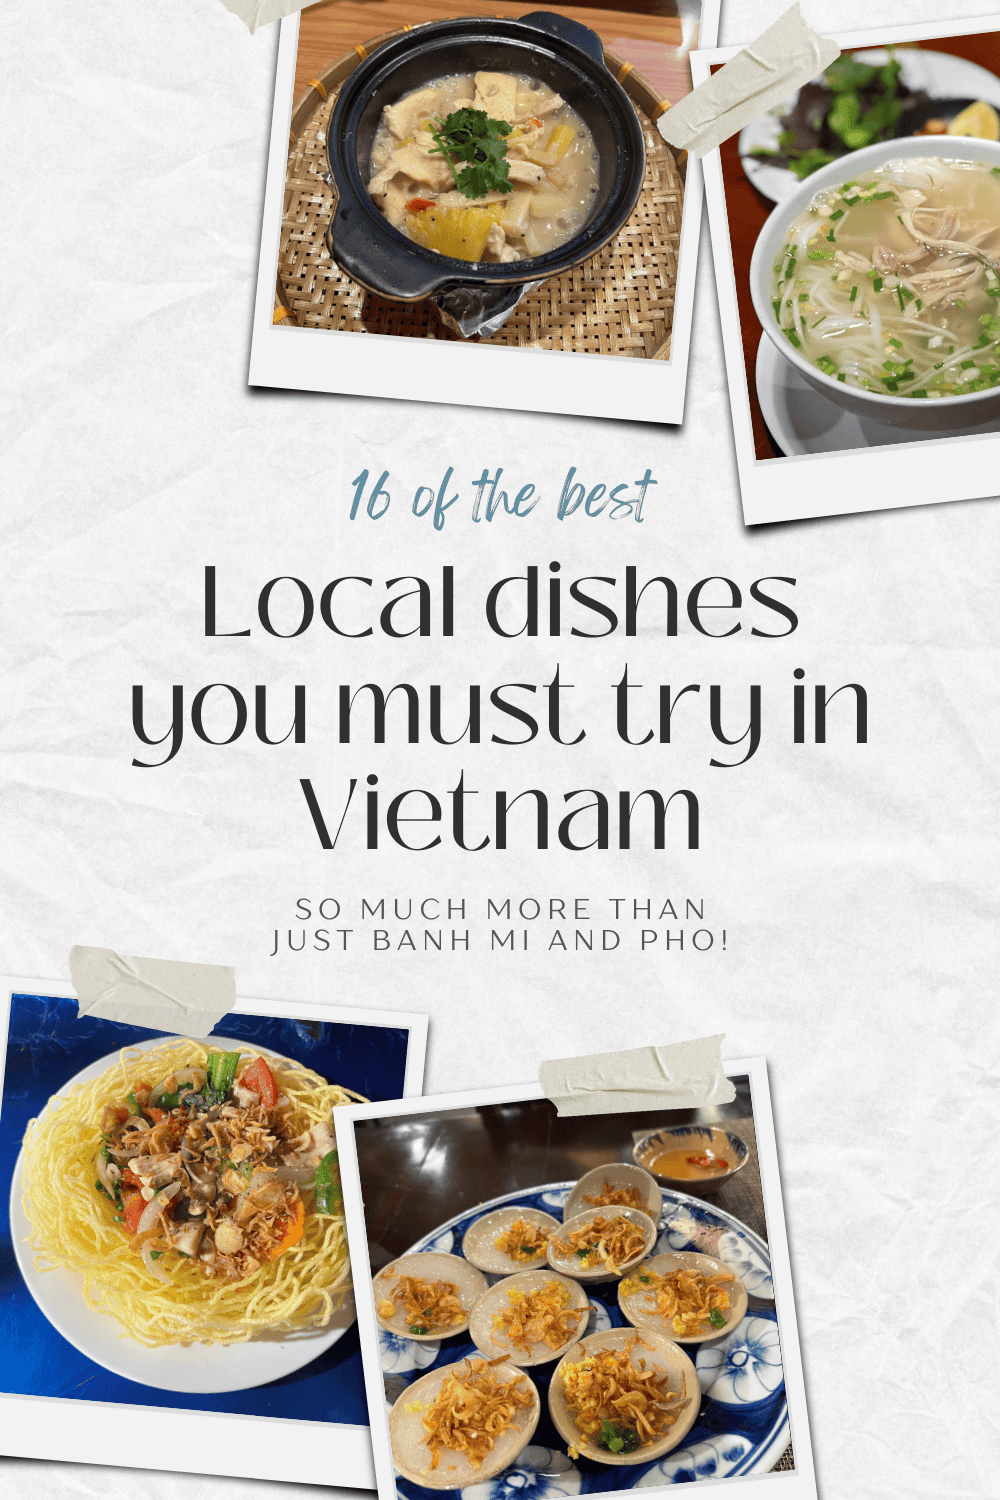 Vietnam has a food culture that has developed over centuries and the people have learned how to make simple ingredients into intensely flavourful dishes. Here is a small selection of the must-try dishes when you visit Vietnam.